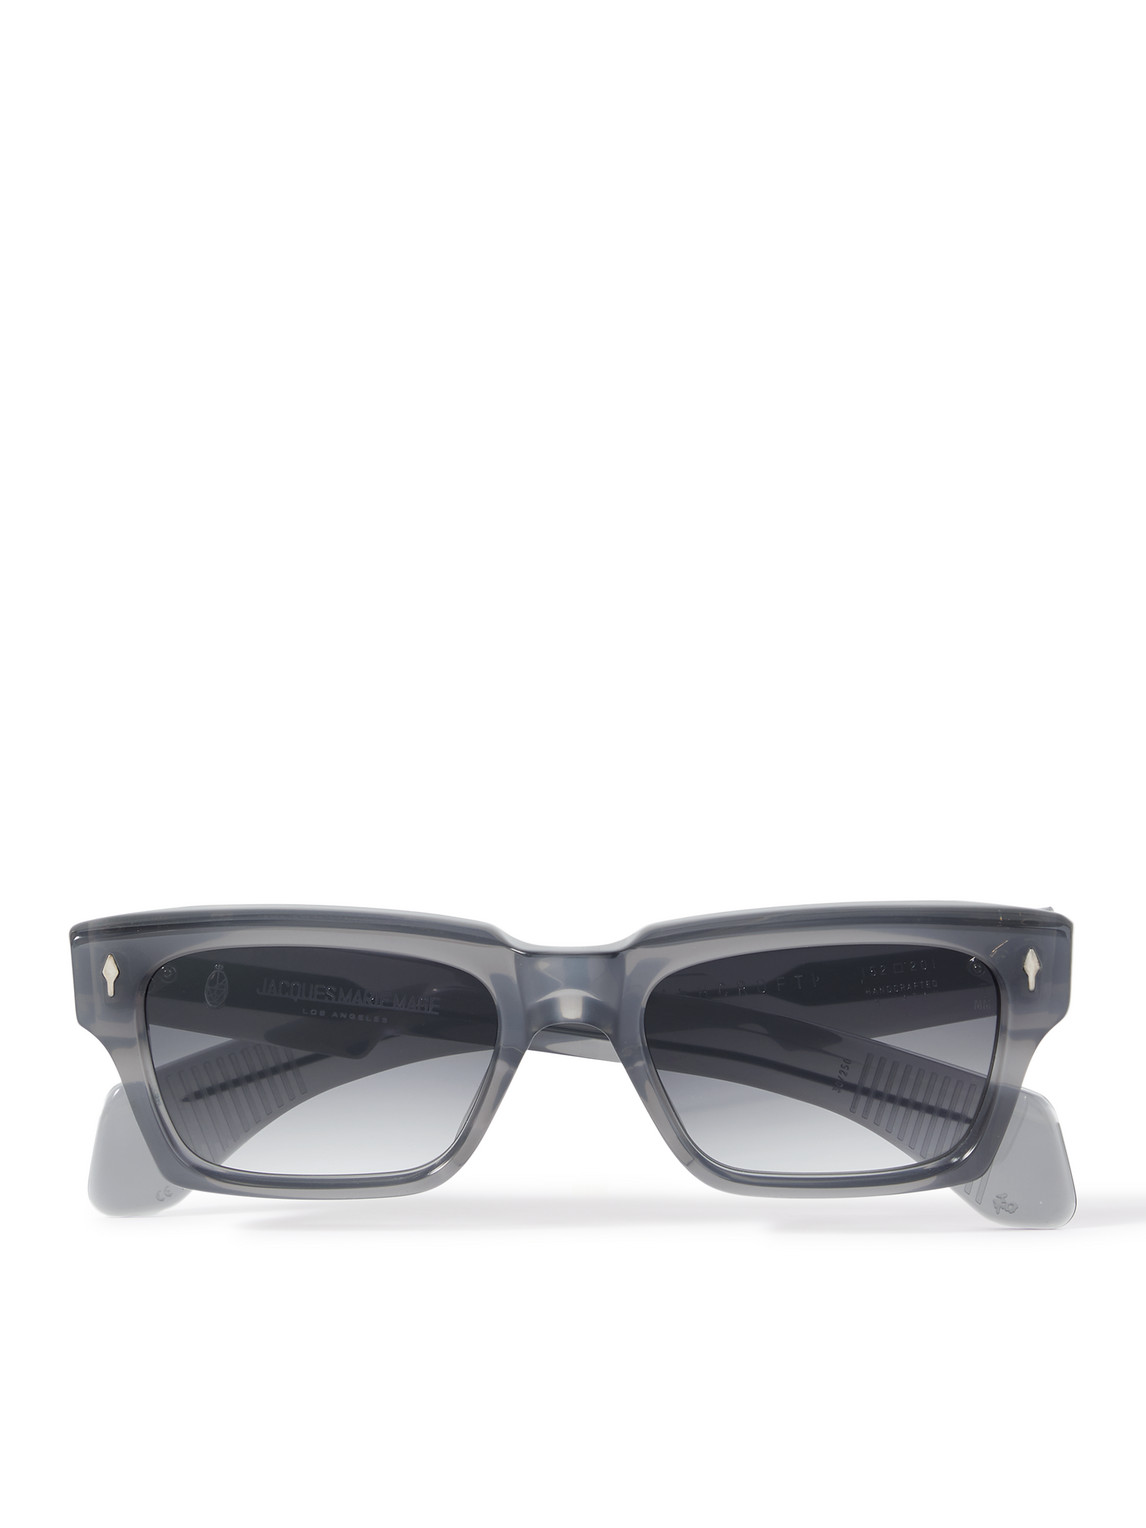 Jacques Marie Mage Ashcroft Rectangular-frame Acetate And Silver-tone Sunglasses In Gray